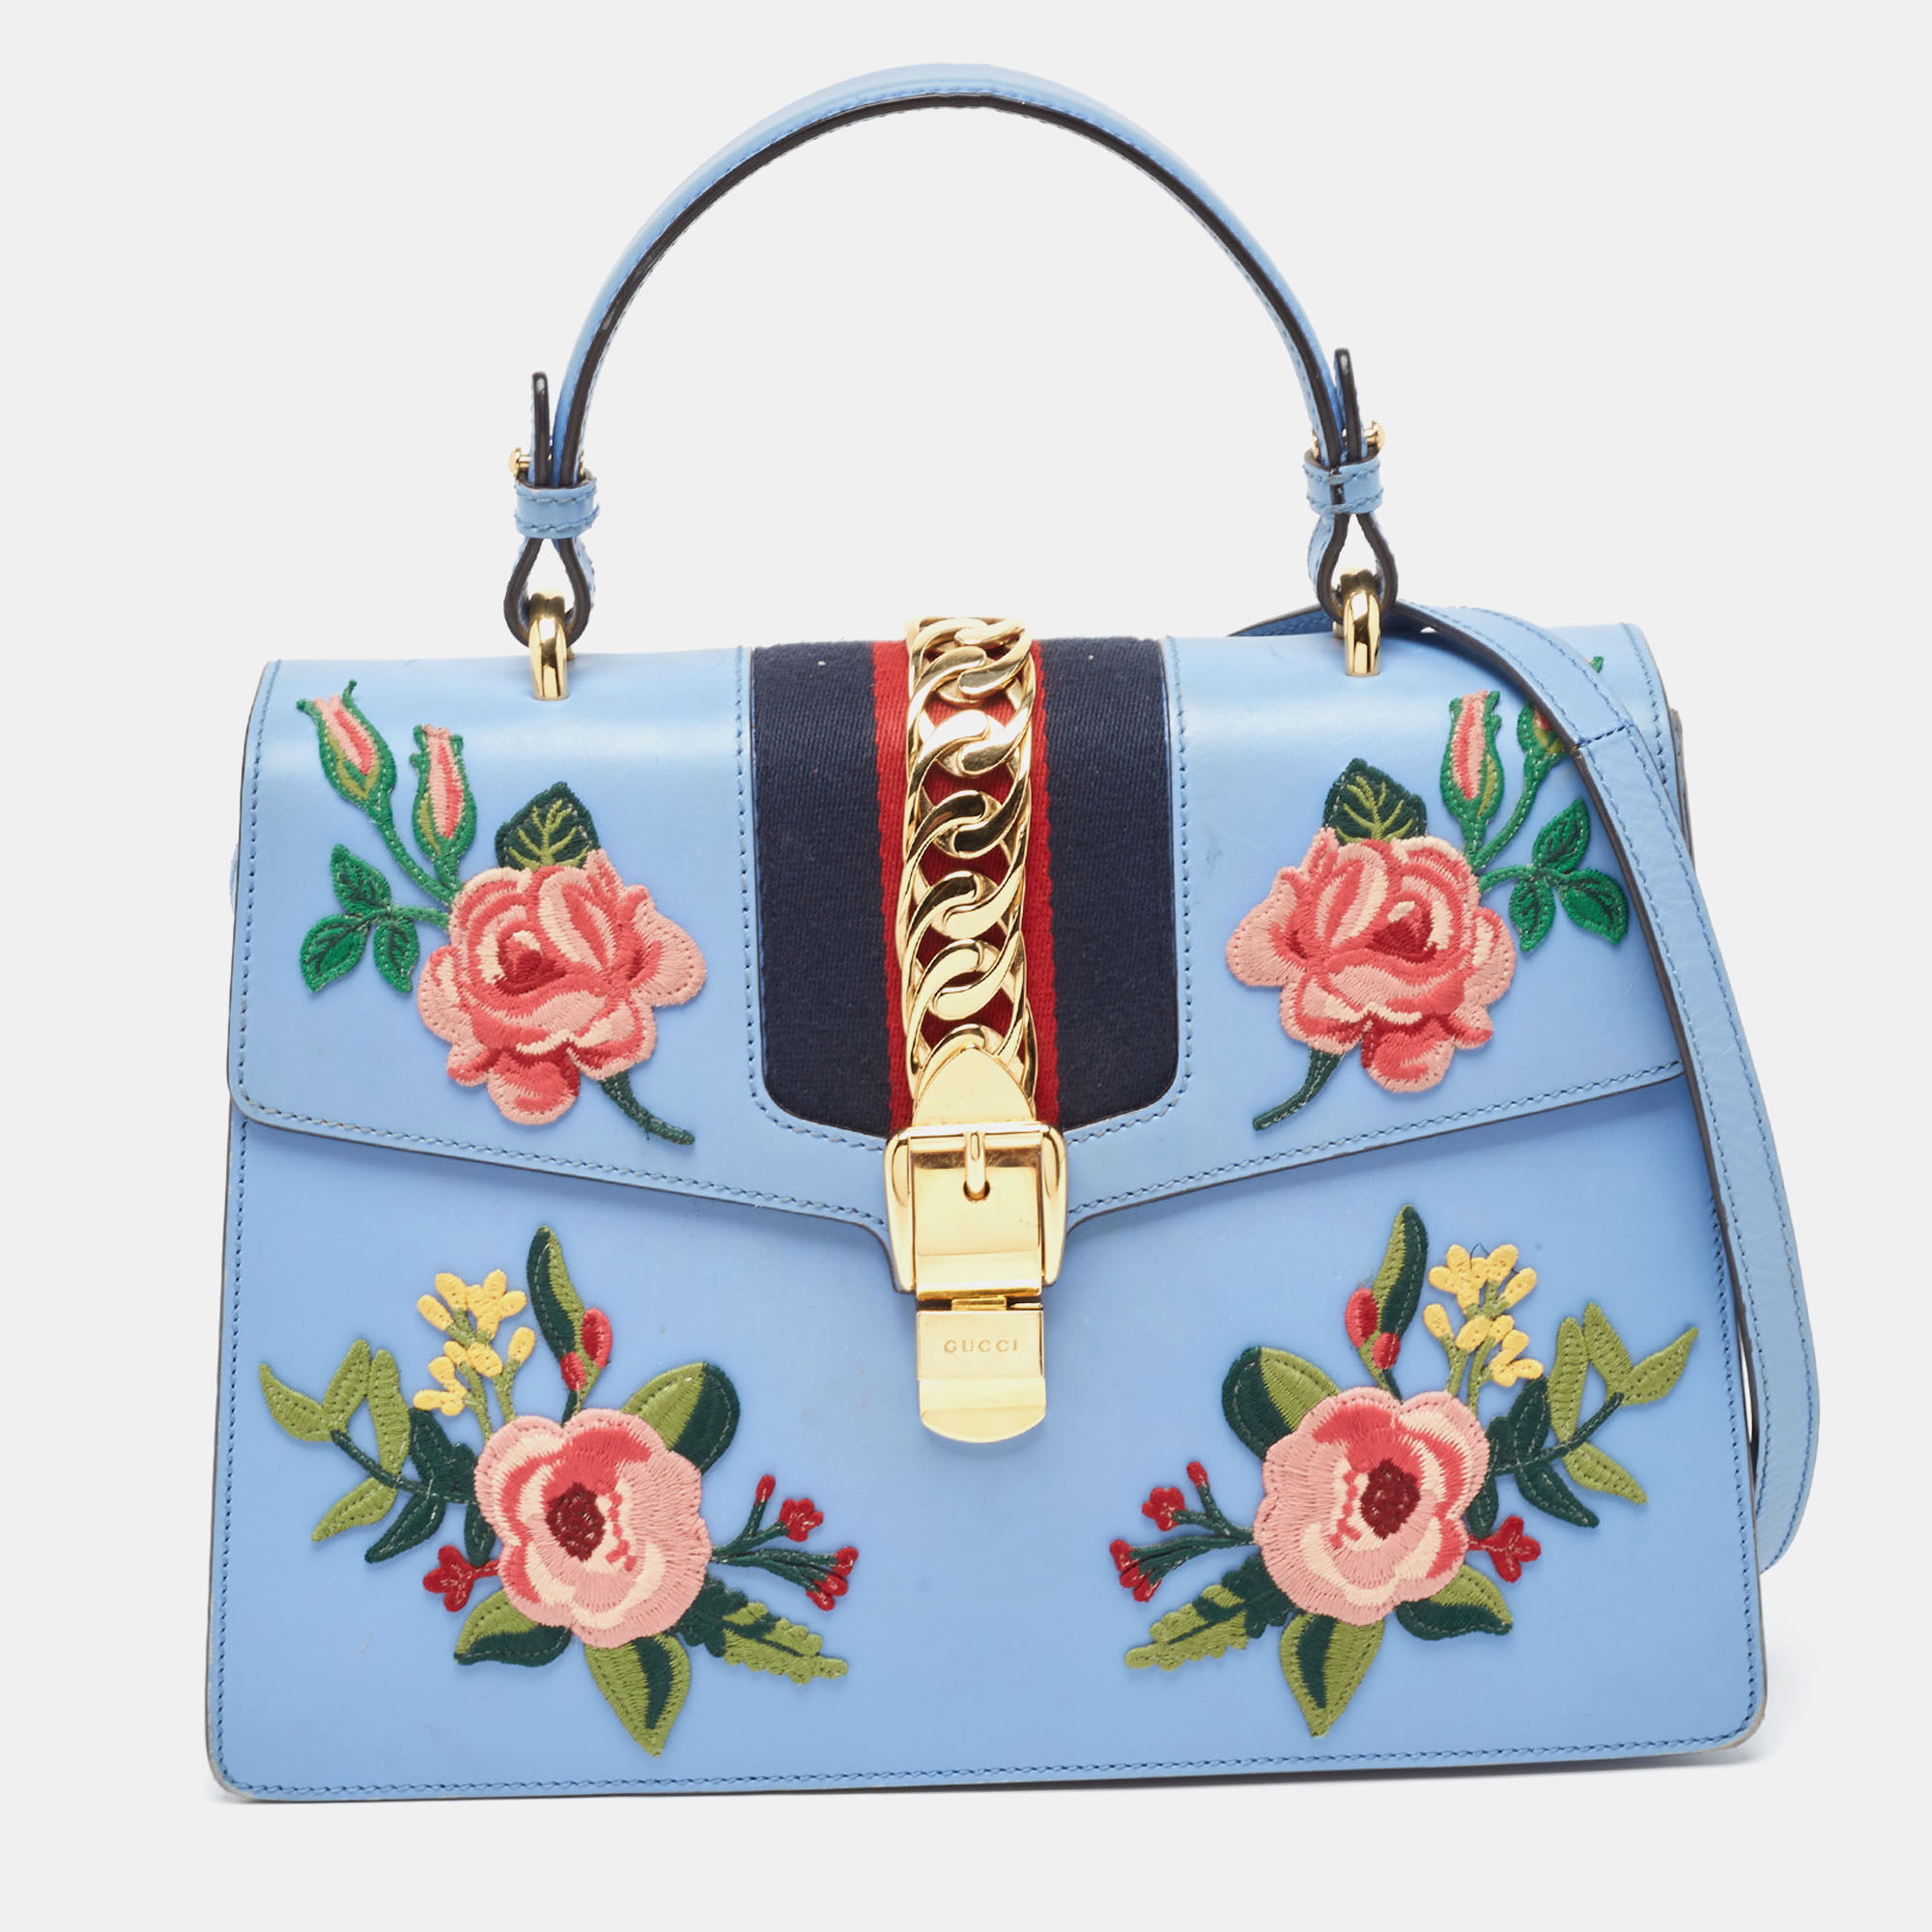 Gucci blue floral embroidered leather medium sylvie top handle bag